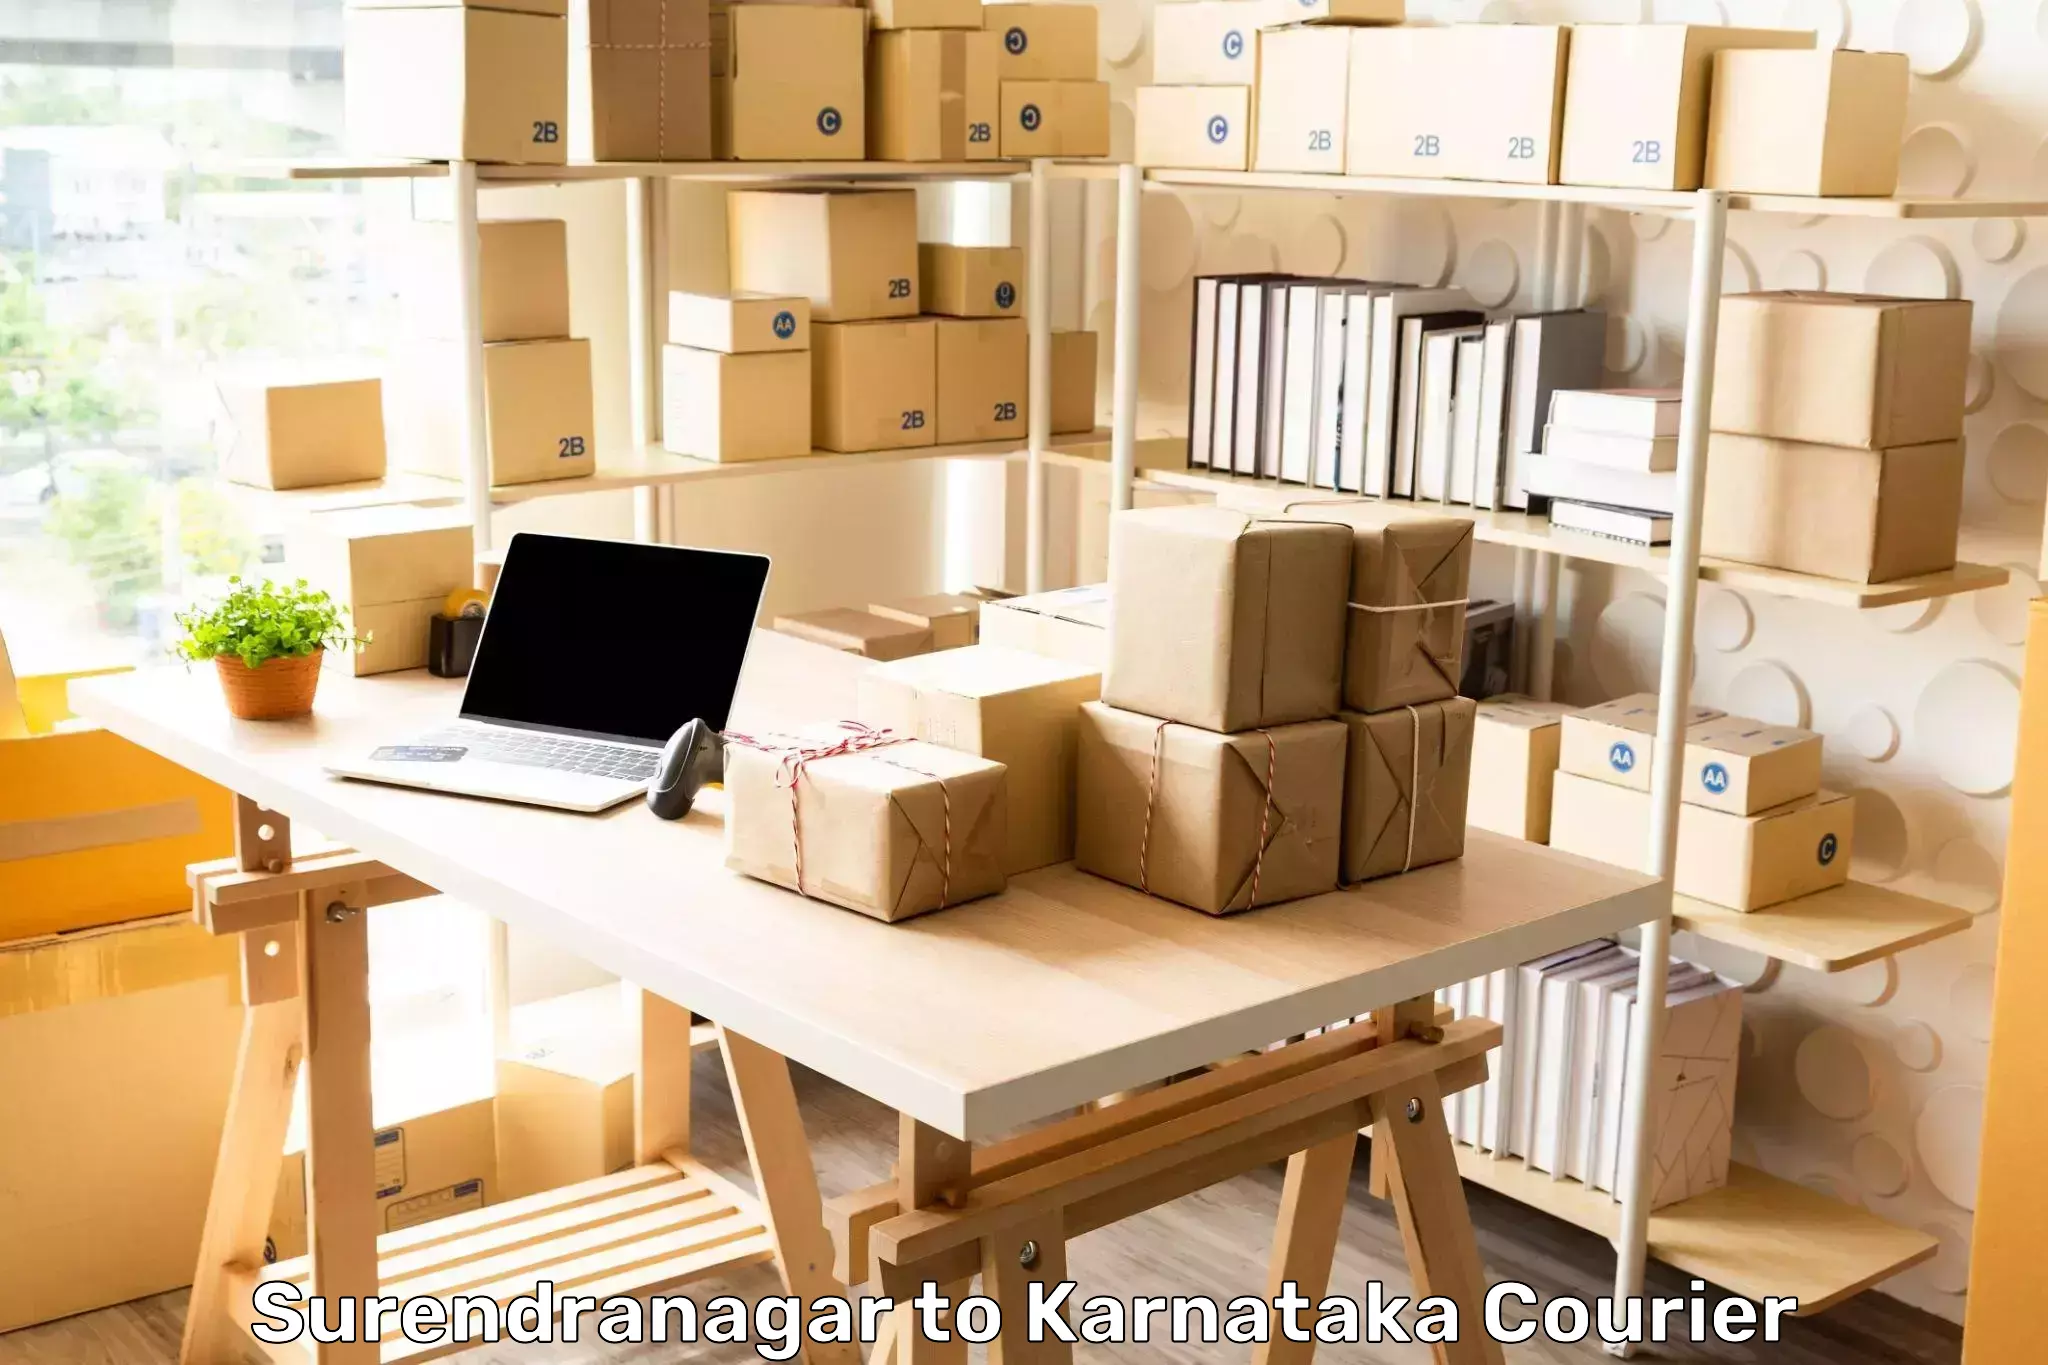 Express package services Surendranagar to Mangalore